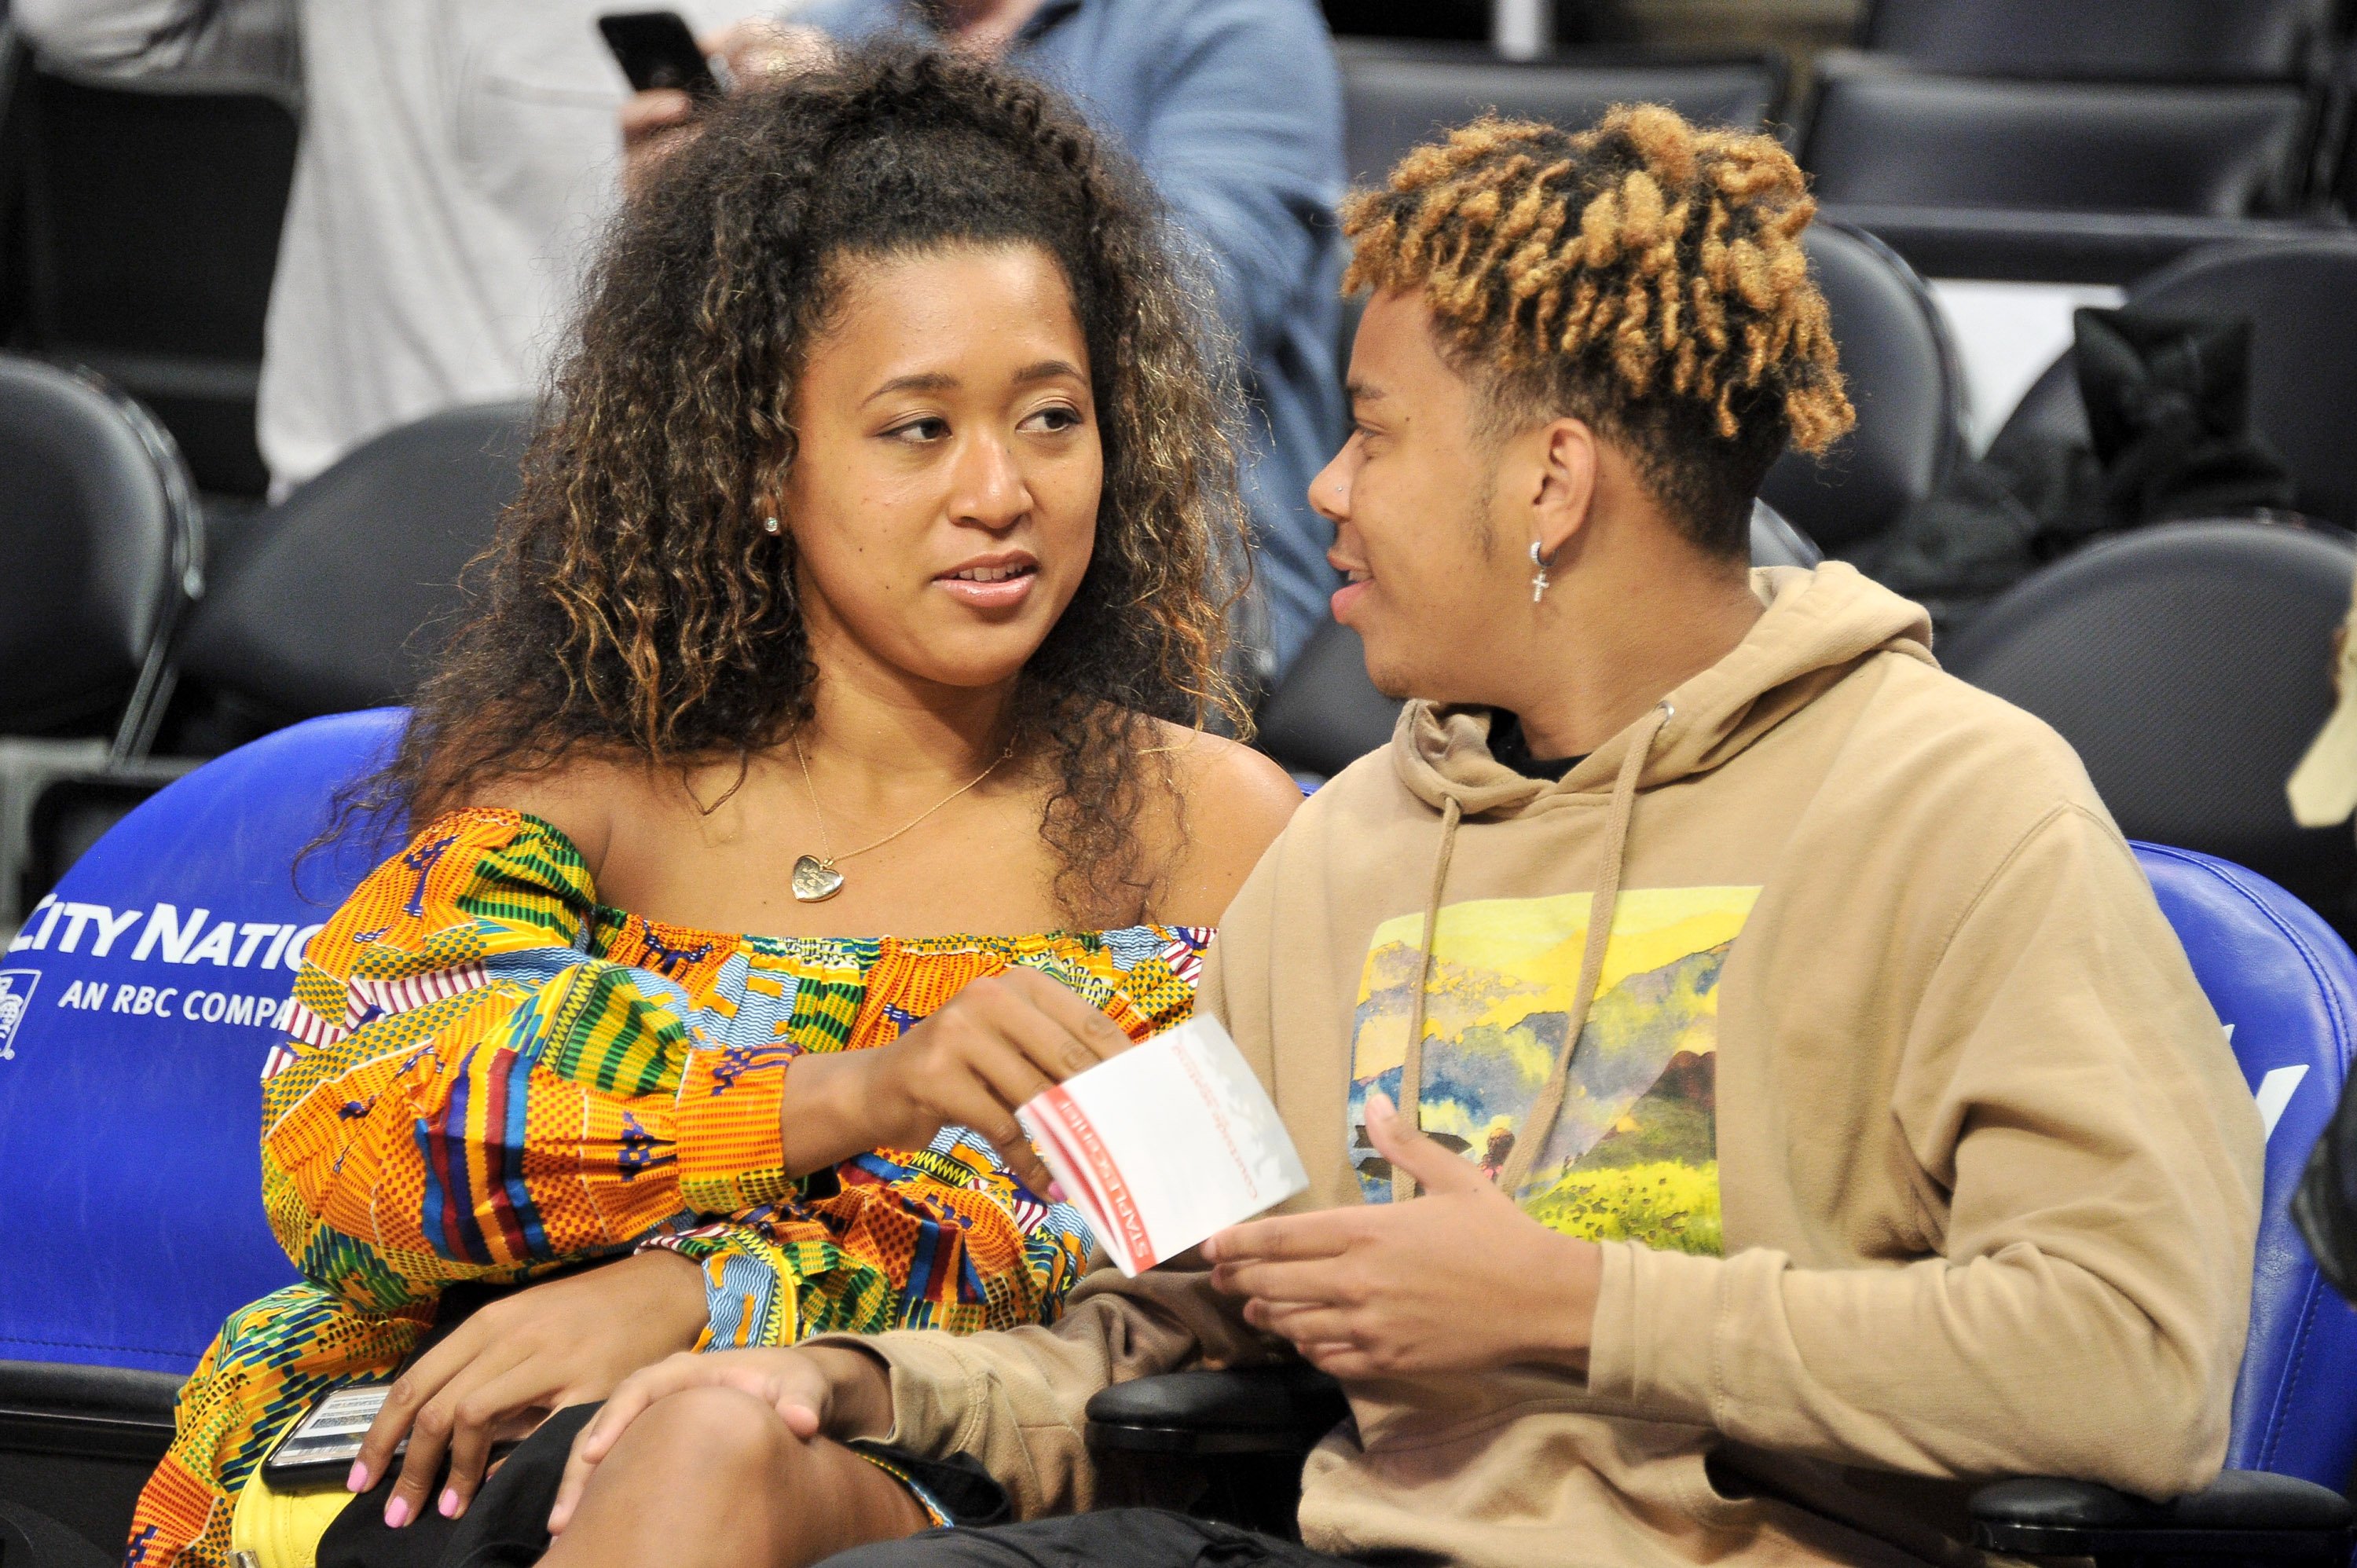 Naomi Osaka and YBN Cordae at the Los Angeles Clippers vs Washington Wizards basketball game at Staples Center on December 01, 2019 in Los Angeles, California. |Source: Getty Images